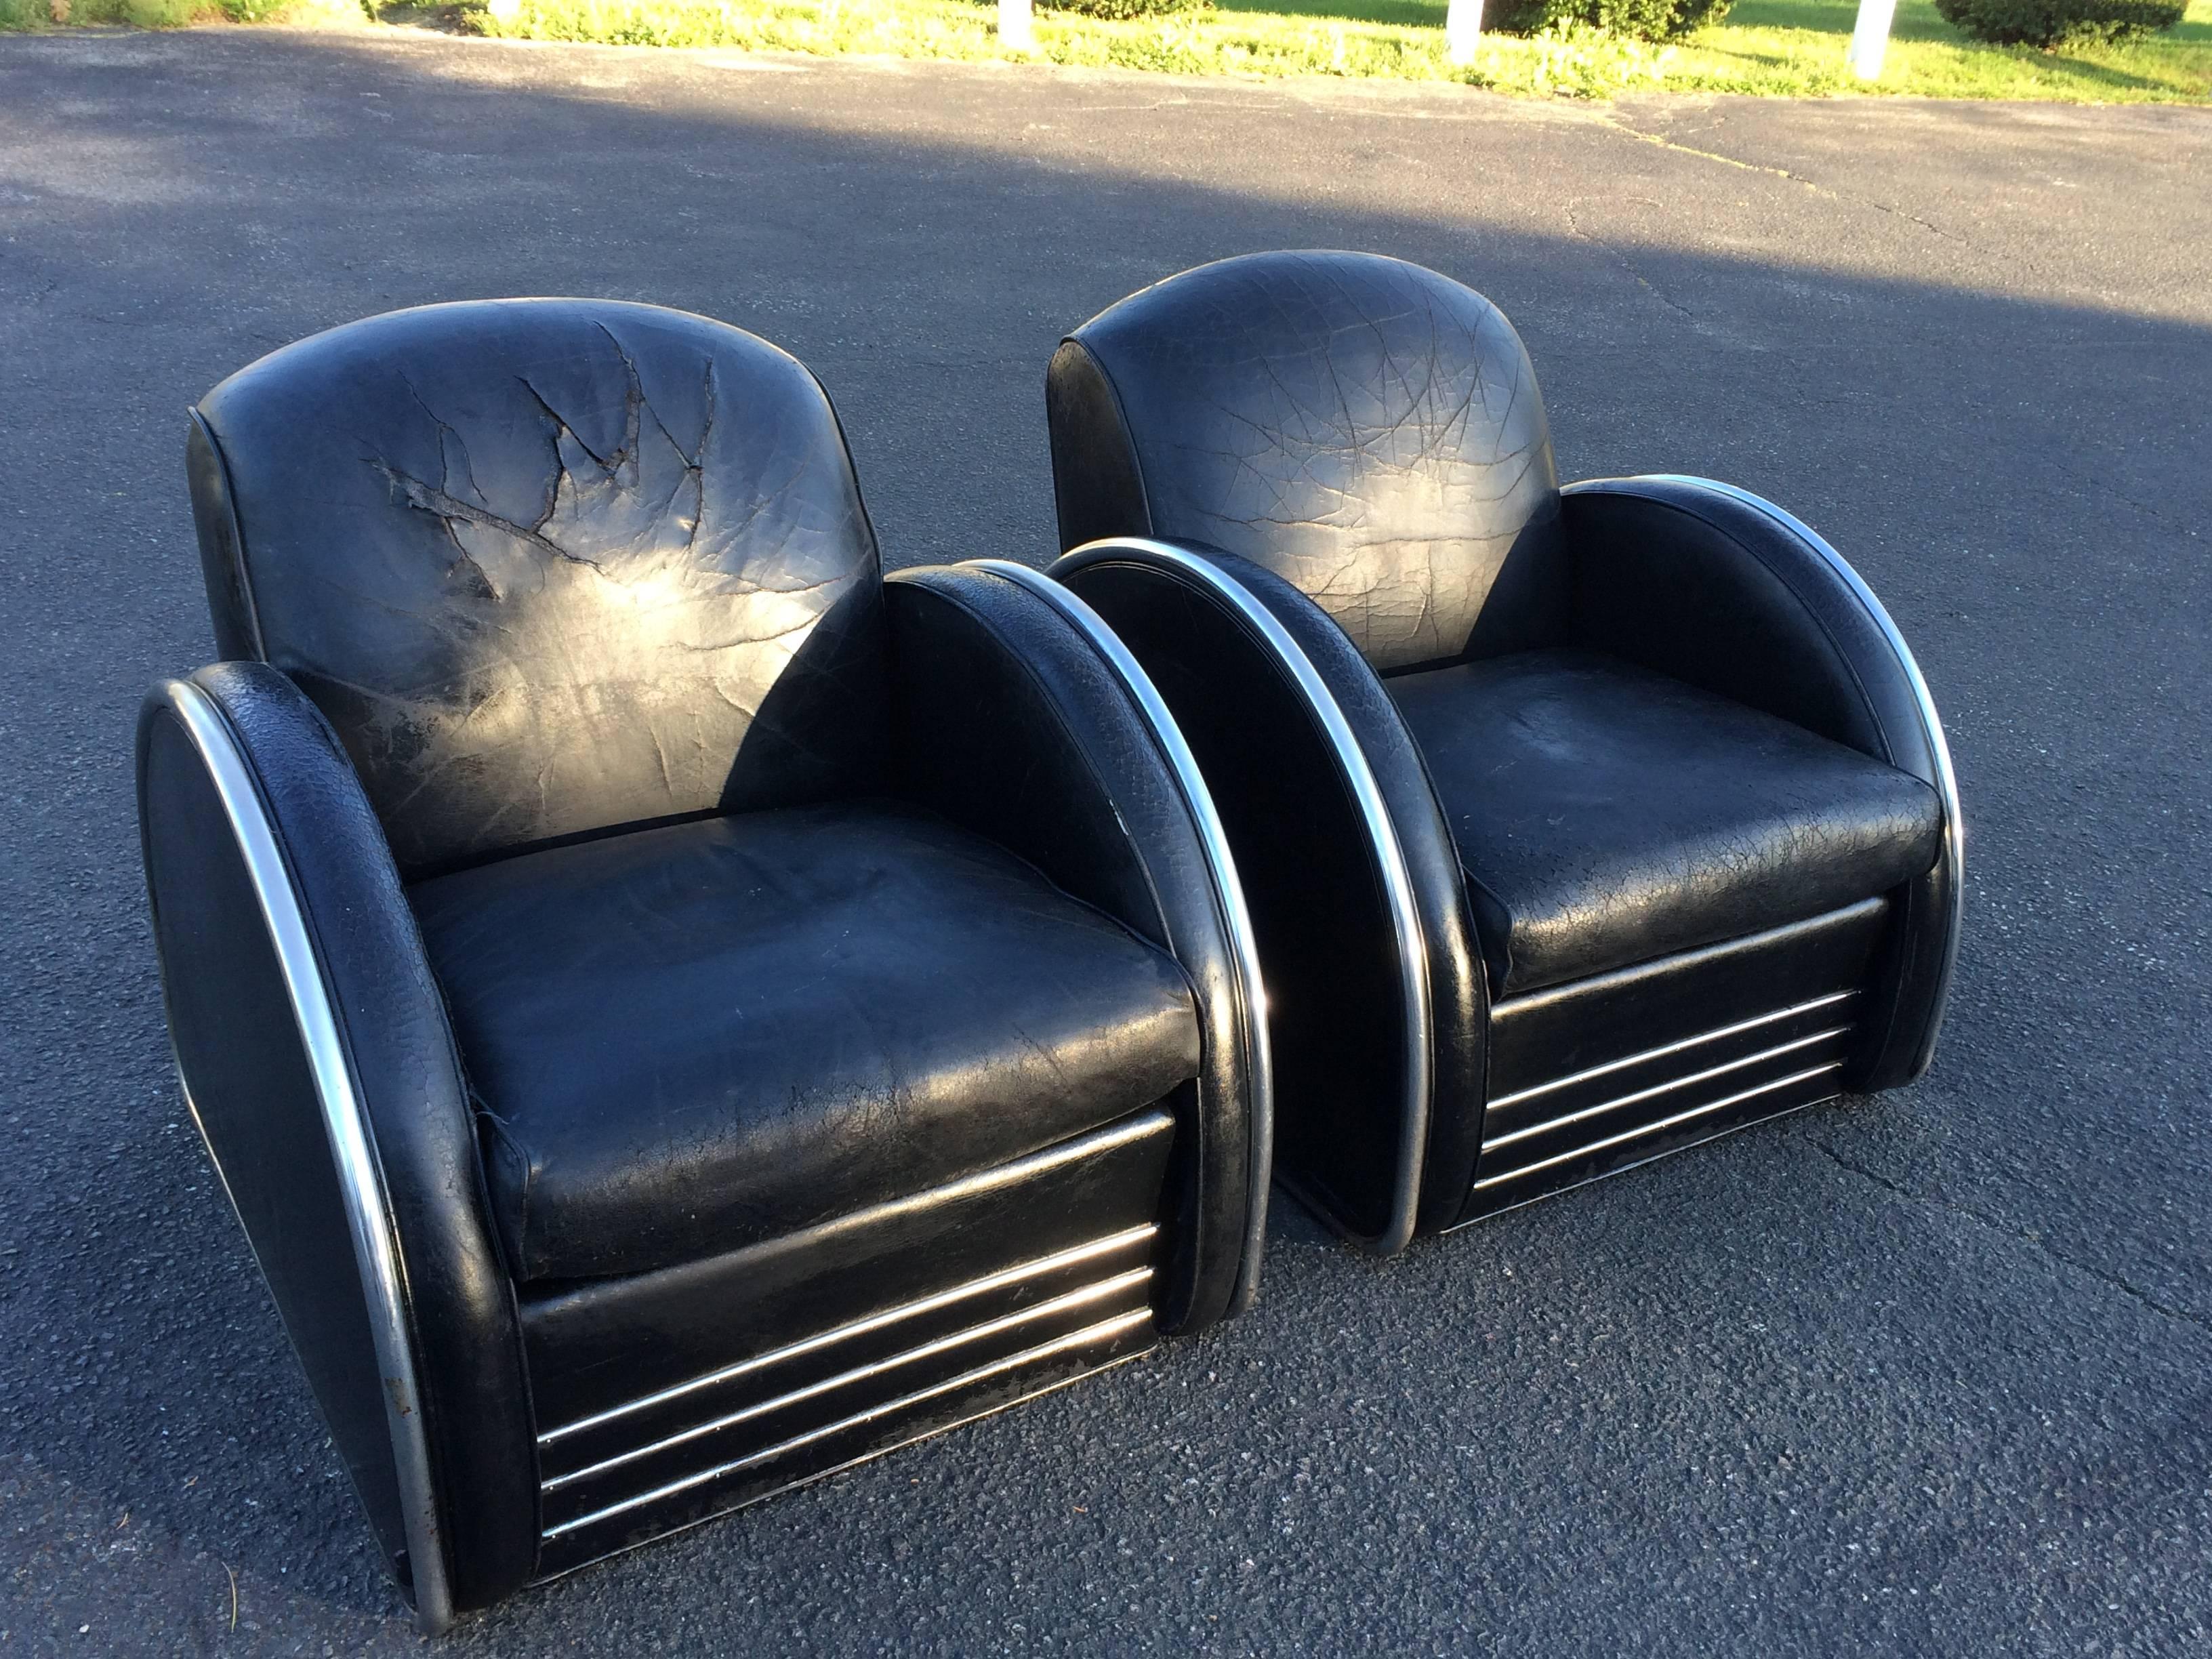 Pair of distressed leather Art Deco club chairs. Classic rounded arms with tubular chrome trim accents these streamlined machine age chairs. Obviously well loved and well used these chairs have very distressed leather to the point of cracking and